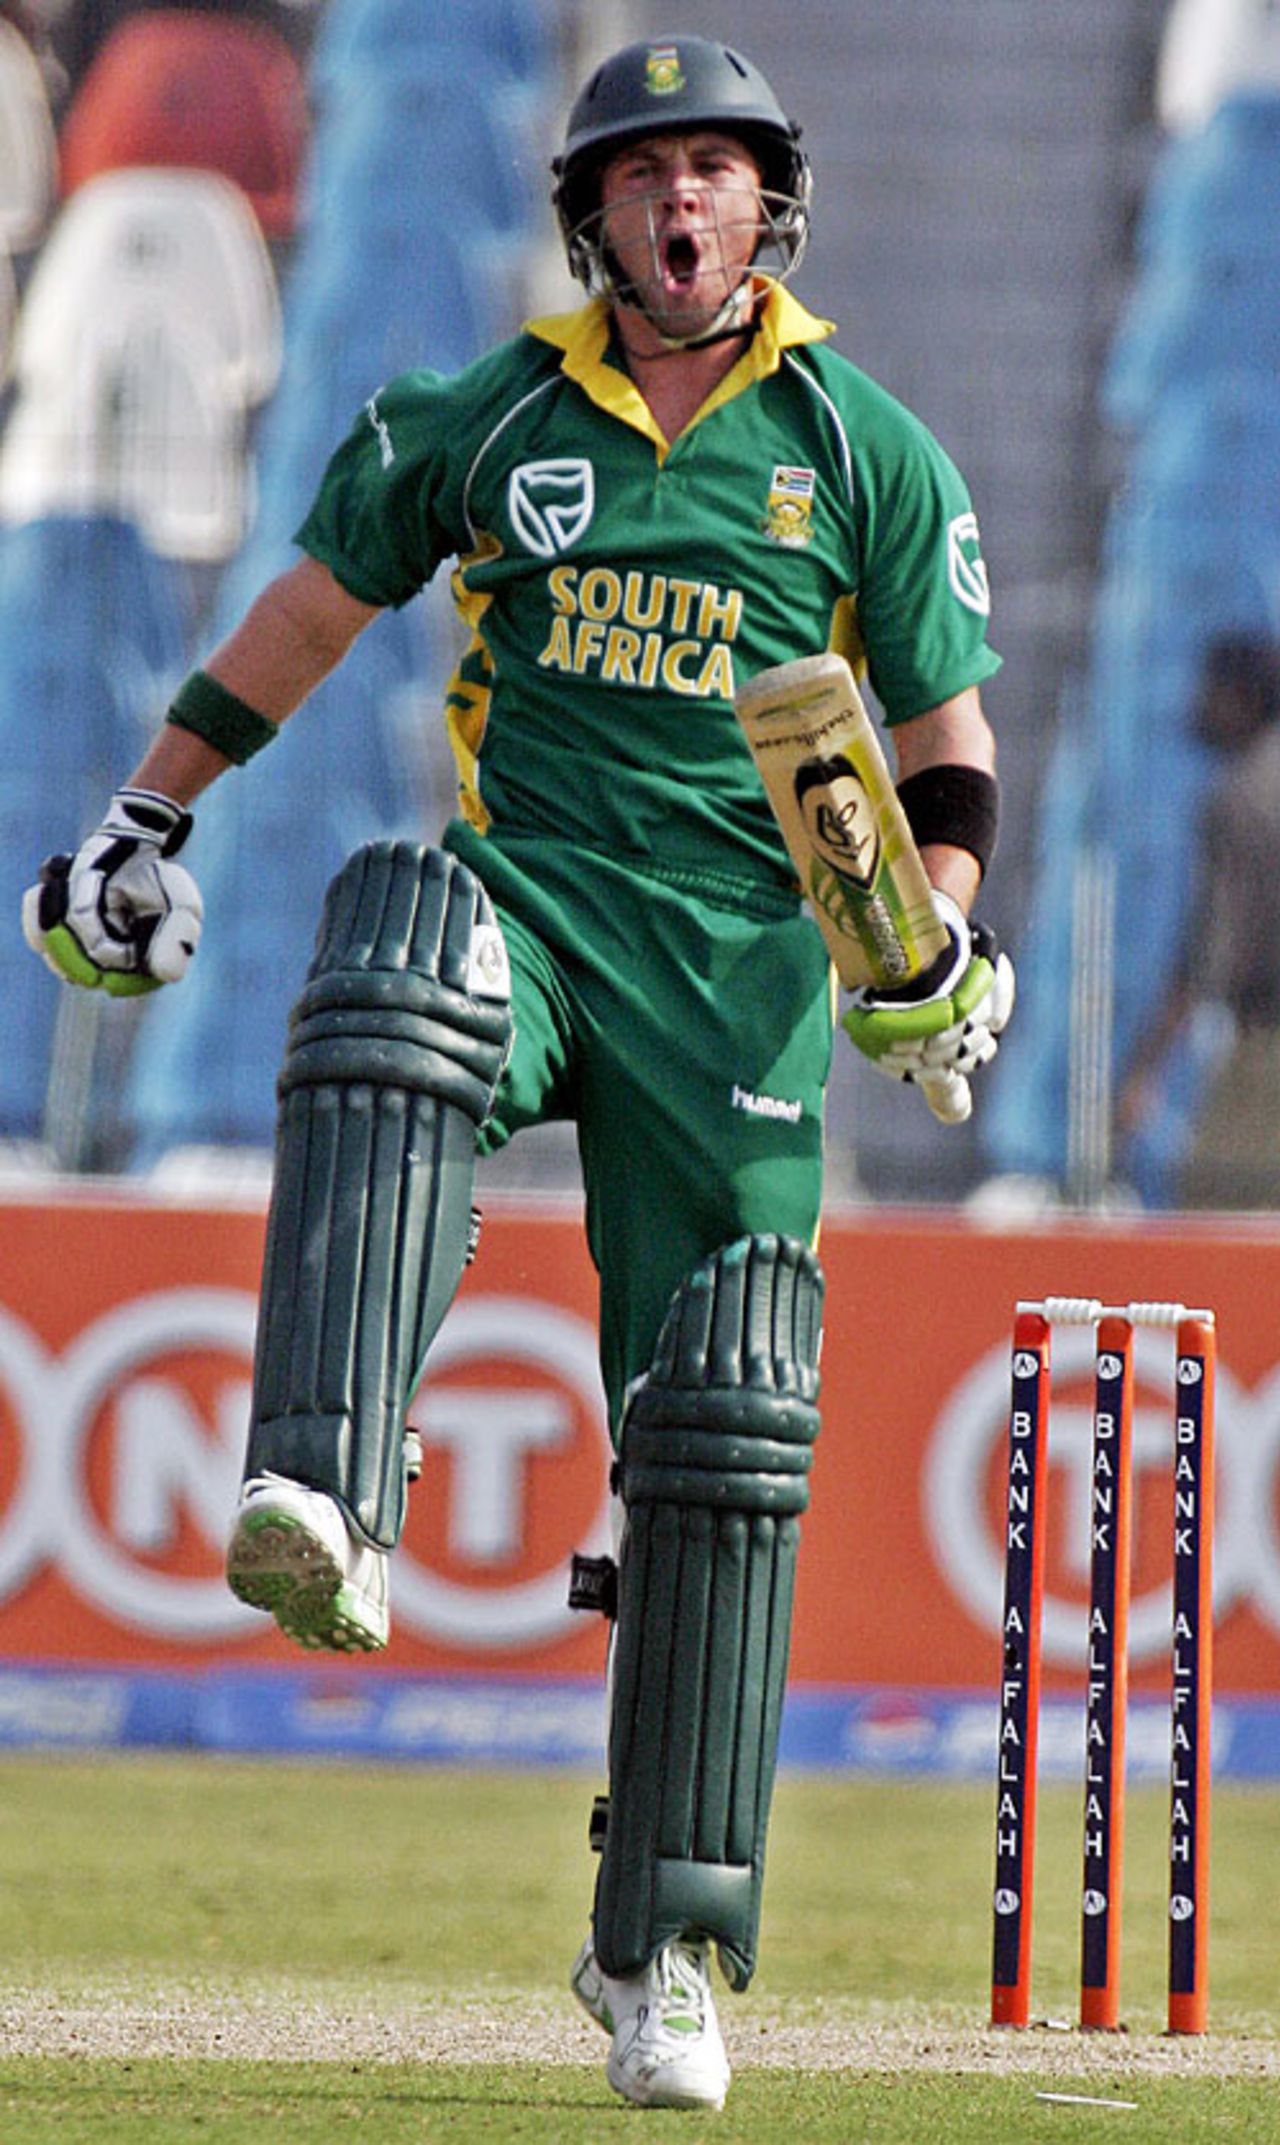 AB de Villiers remained unbeaten on 105 off 93 balls, Pakistan v South Africa, 1st ODI, Lahore, October 18, 2007